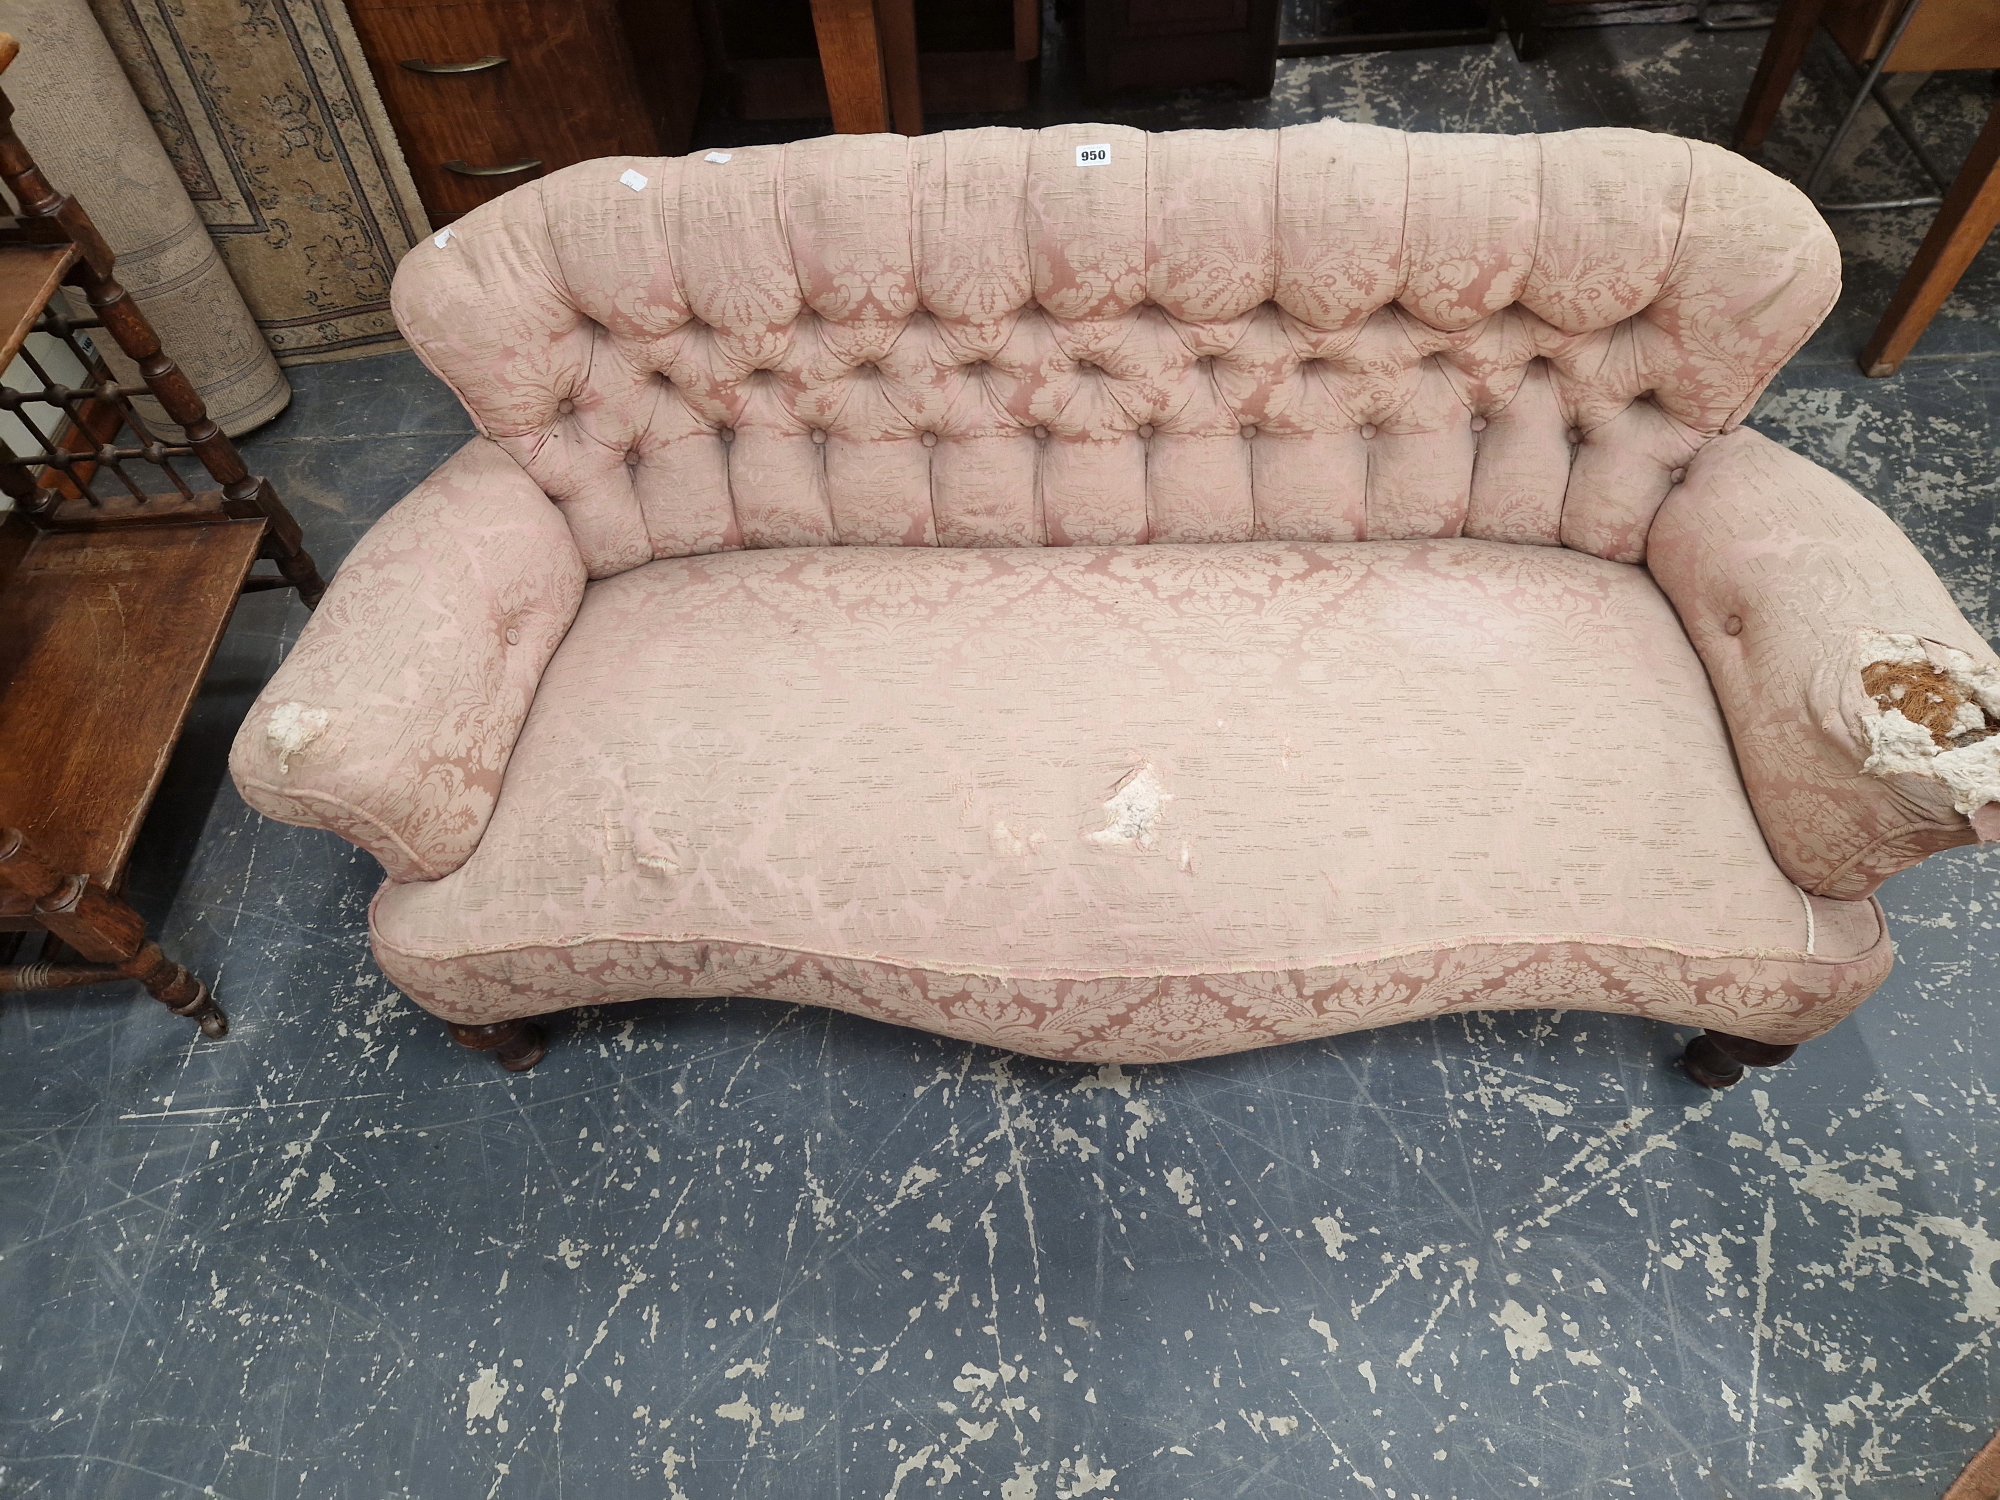 A VICTORIAN MAHOGANY SETTEE BUTTON UPHOLSTERED IN PINK DAMASK, THE FRONT LEGS OF SPINDLE SHAPE - Image 3 of 5